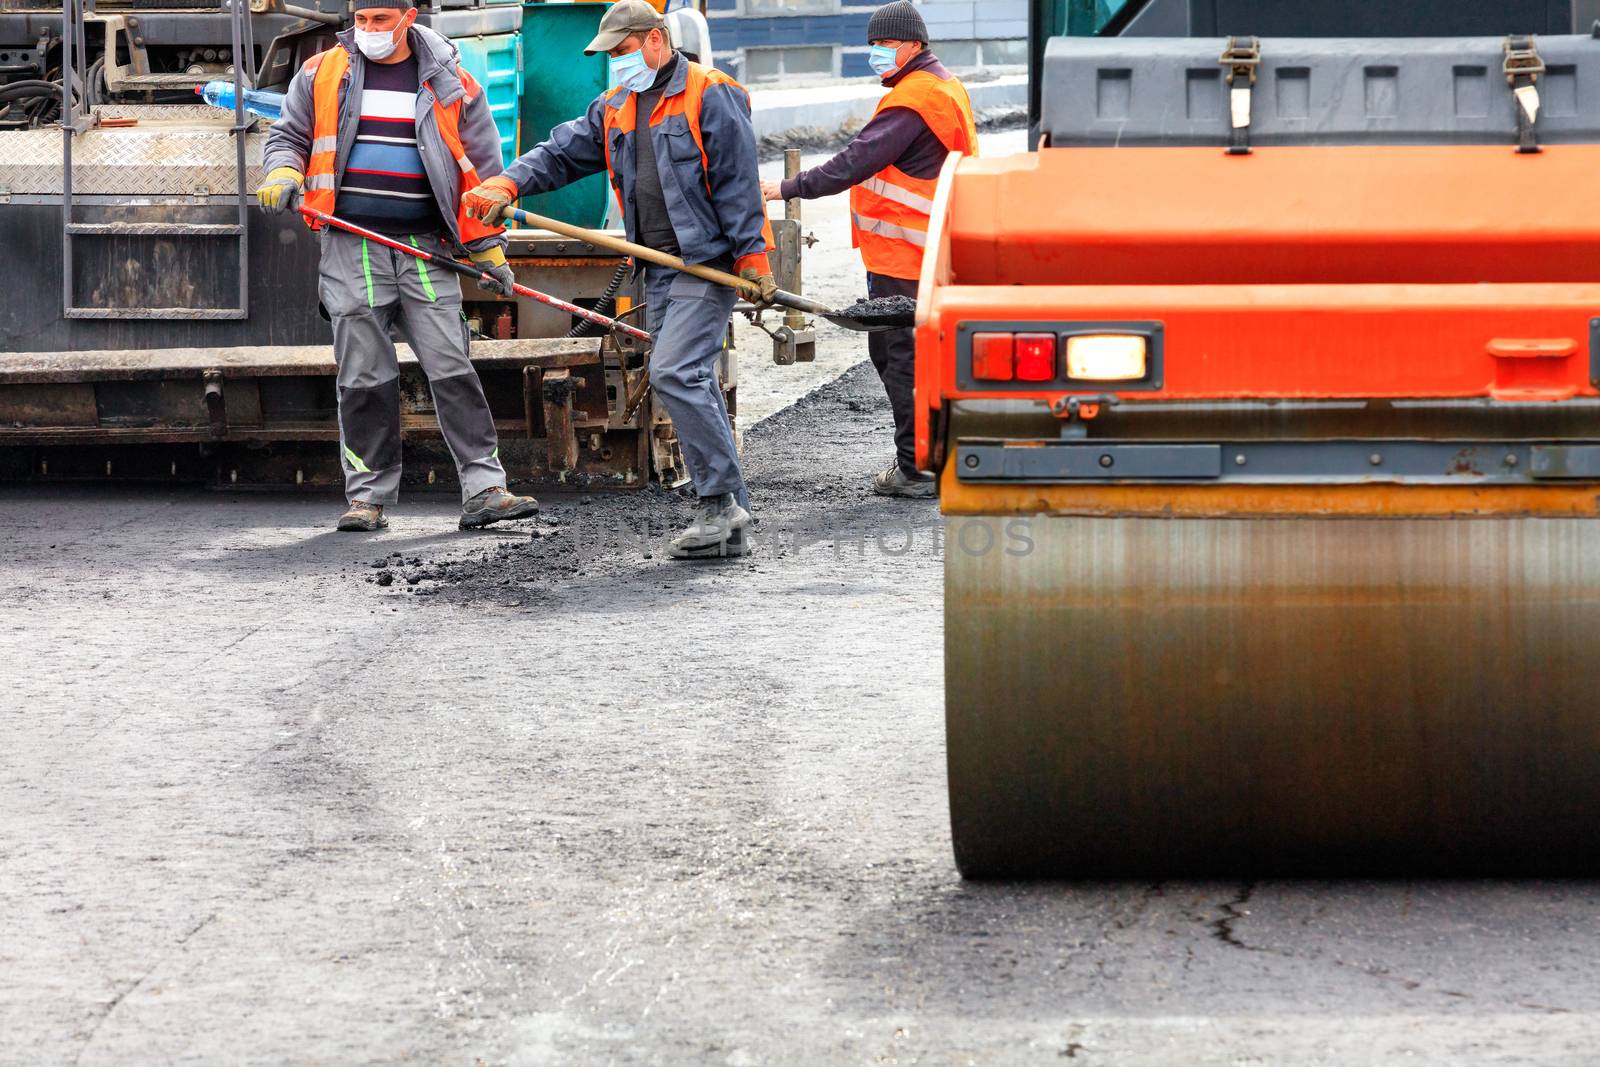 A working team of road workers in protective medical masks and overalls, using powerful road equipment and shovels, lay a new asphalt coating on the work site, image with copy space.